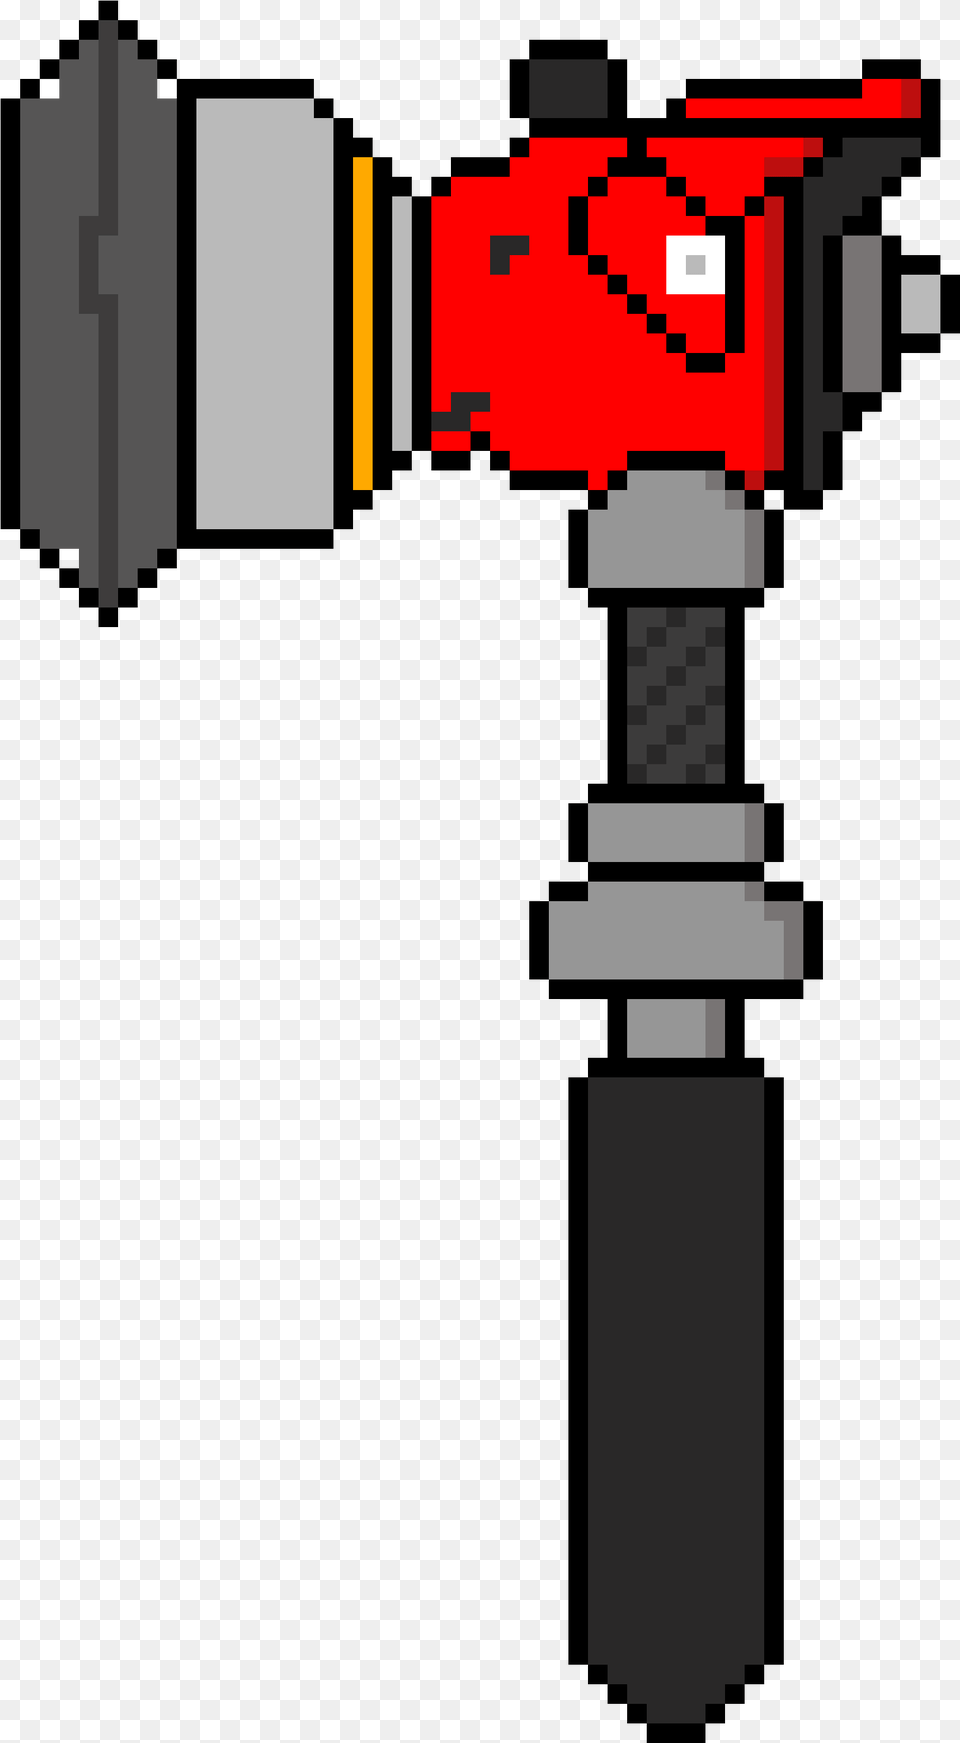 Hammer Hammer, Device, Power Drill, Tool Png Image